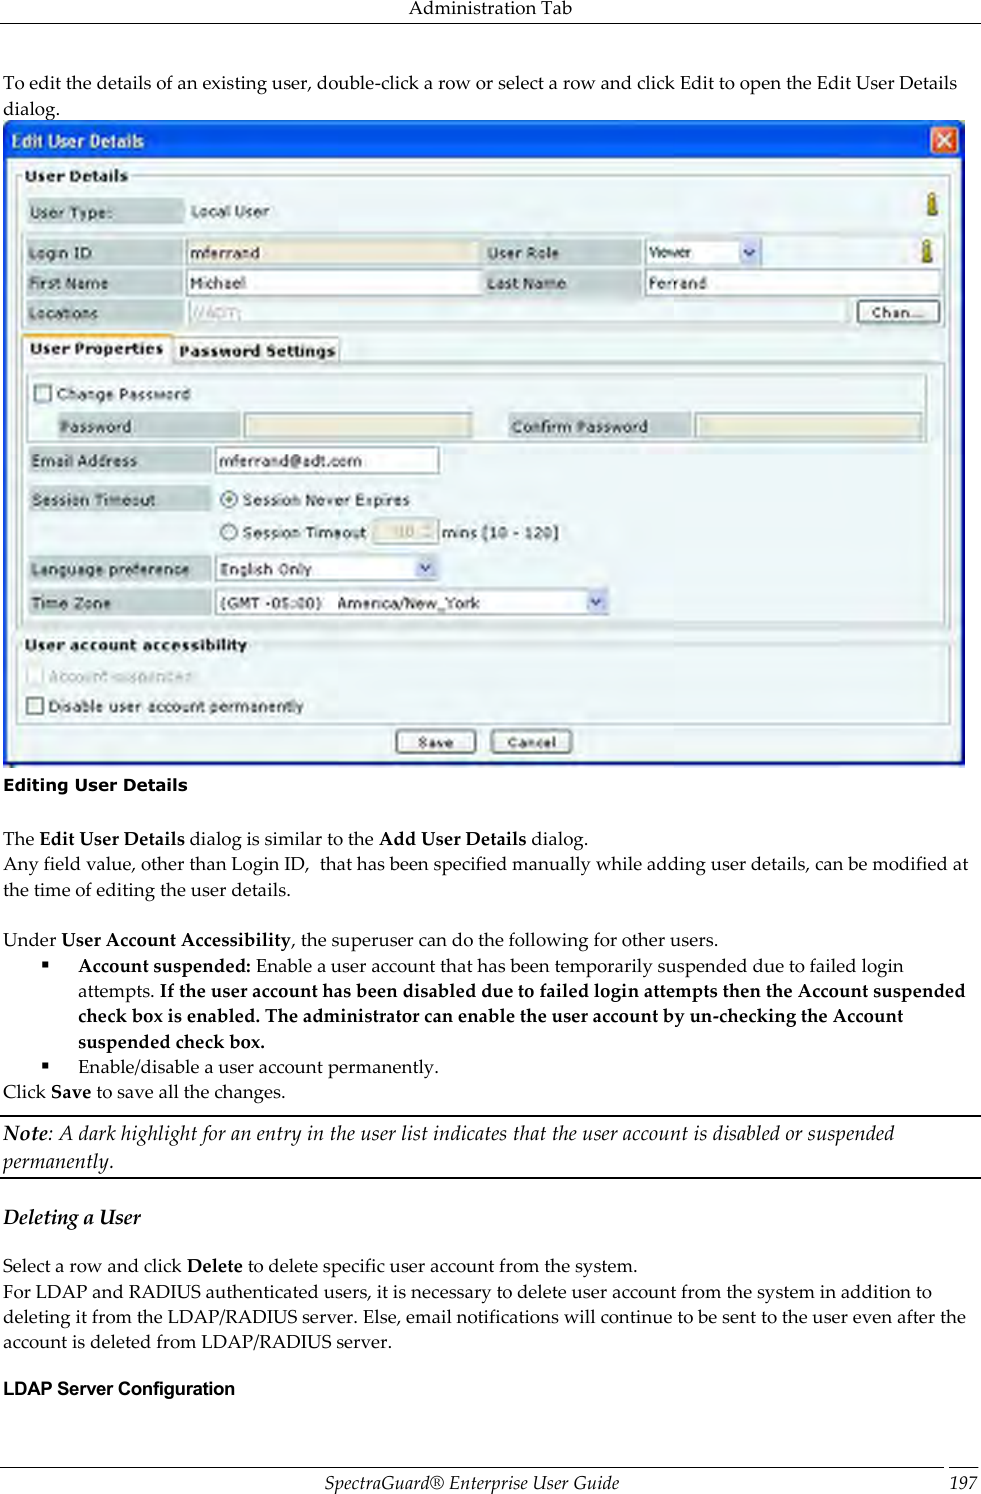 Administration Tab SpectraGuard®  Enterprise User Guide 197 To edit the details of an existing user, double-click a row or select a row and click Edit to open the Edit User Details dialog.  Editing User Details   The Edit User Details dialog is similar to the Add User Details dialog. Any field value, other than Login ID,  that has been specified manually while adding user details, can be modified at the time of editing the user details.   Under User Account Accessibility, the superuser can do the following for other users.  Account suspended: Enable a user account that has been temporarily suspended due to failed login attempts. If the user account has been disabled due to failed login attempts then the Account suspended check box is enabled. The administrator can enable the user account by un-checking the Account suspended check box.  Enable/disable a user account permanently.            Click Save to save all the changes. Note: A dark highlight for an entry in the user list indicates that the user account is disabled or suspended permanently. Deleting a User Select a row and click Delete to delete specific user account from the system. For LDAP and RADIUS authenticated users, it is necessary to delete user account from the system in addition to deleting it from the LDAP/RADIUS server. Else, email notifications will continue to be sent to the user even after the account is deleted from LDAP/RADIUS server. LDAP Server Configuration 